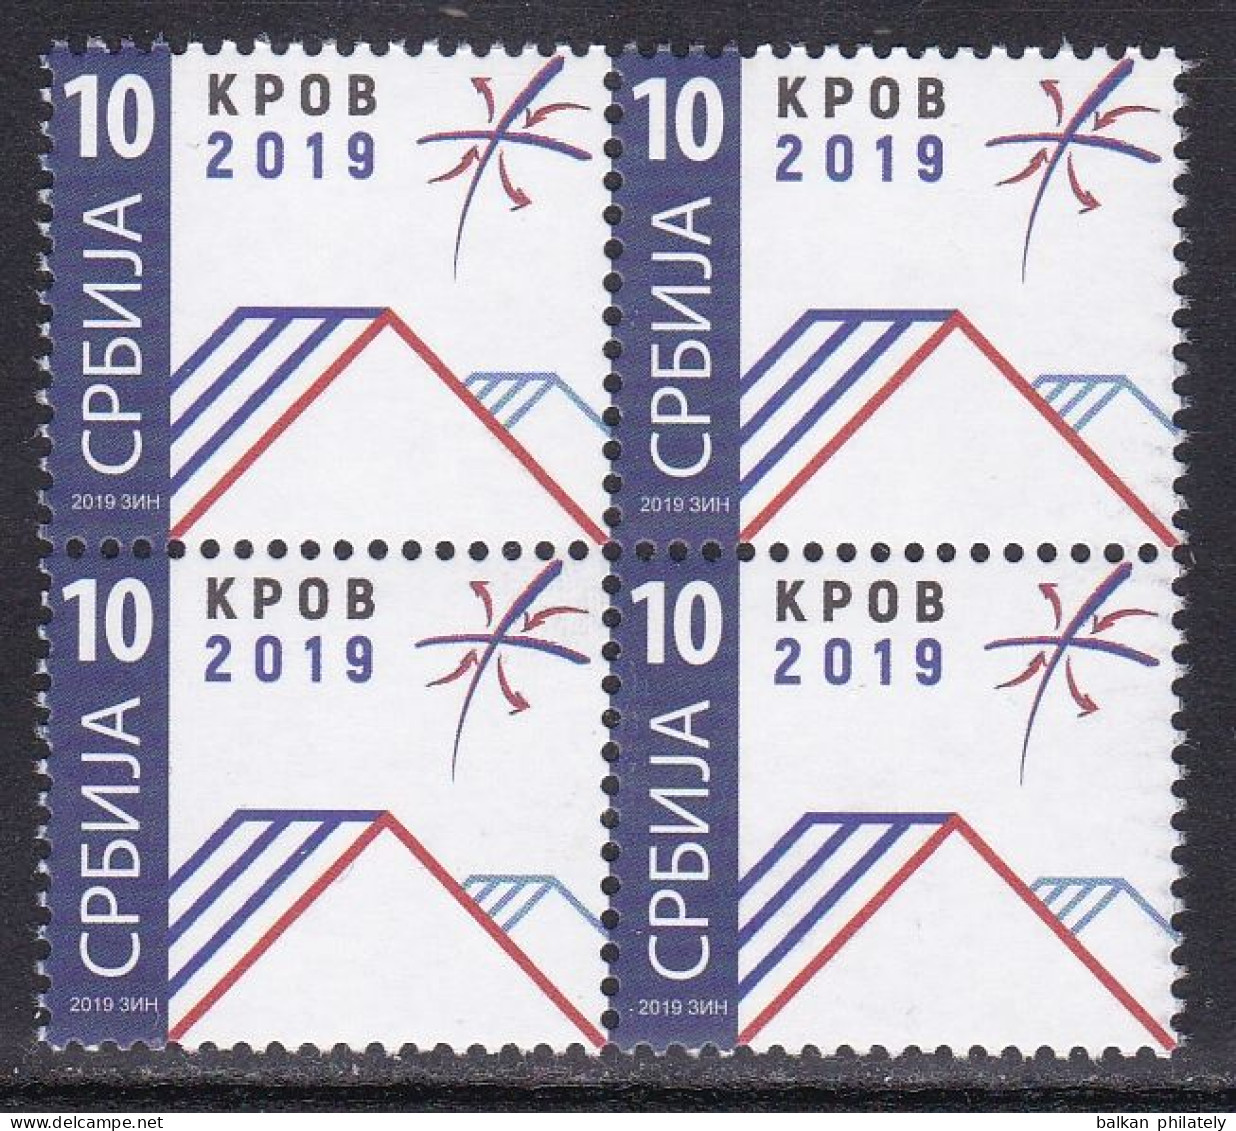 Serbia 2019 Roof Refugees Organizations Tax Charity Surcharge Stamp MNH - Serbia